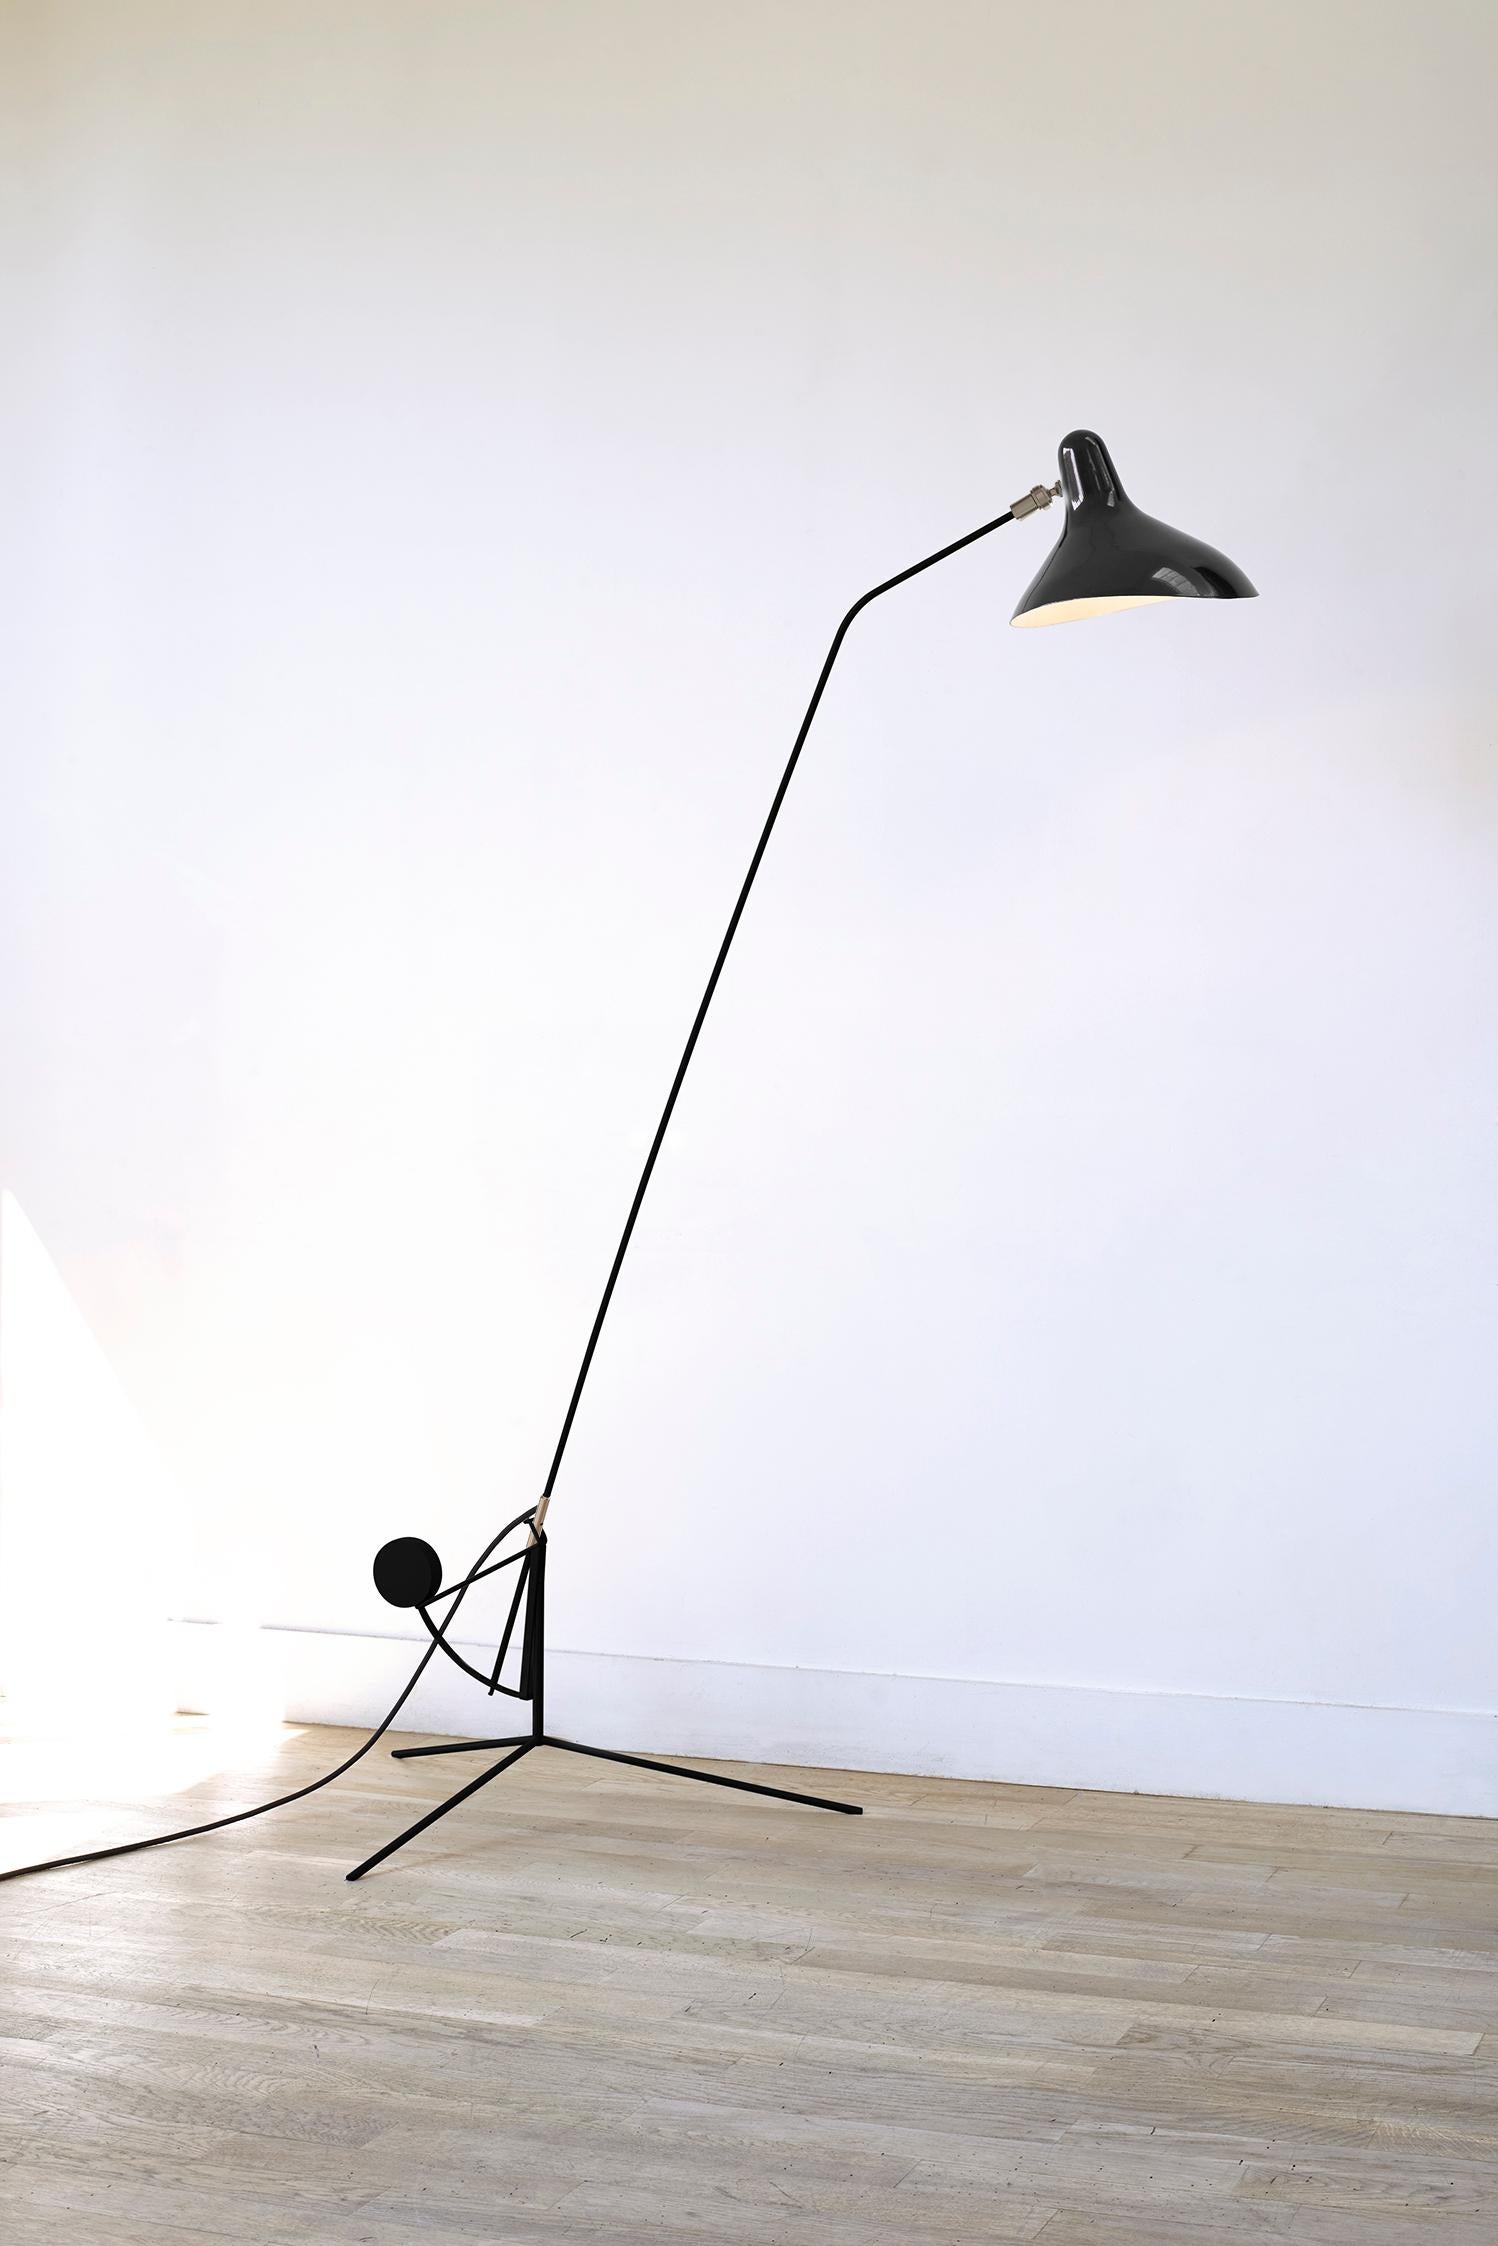 Mantis BS1 Large Floor Lamp by Bernard Schottlander
Dimensions: D 108 x W 74 x H 170 cm
Materials: Steel, Aluminium

All our lamps can be wired according to each country. If sold to the USA it will be wired for the USA for instance.

Floor